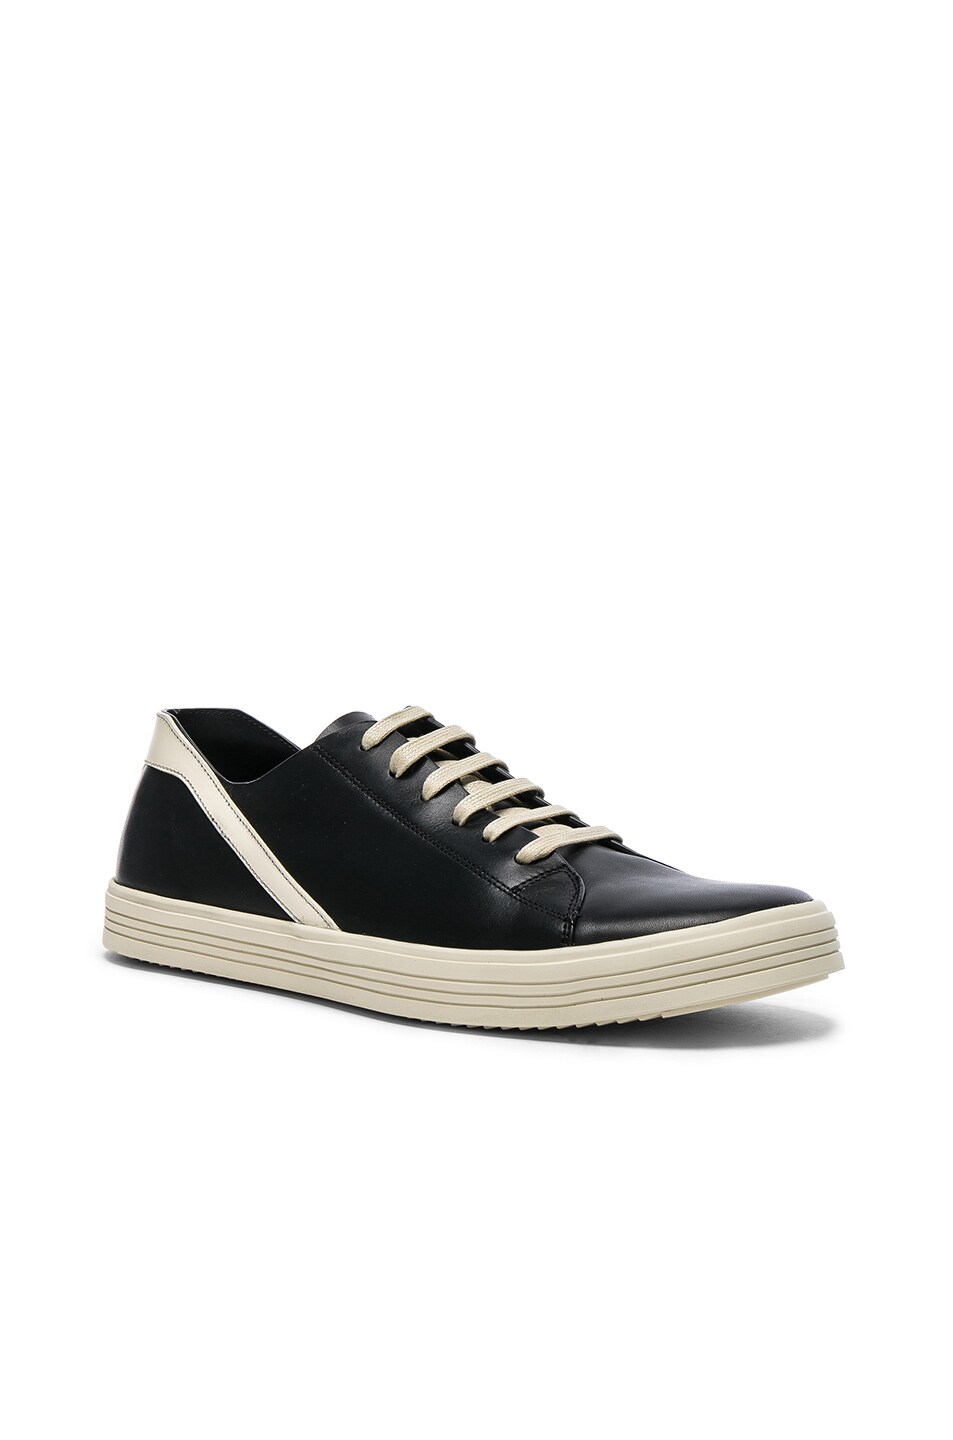 Image 1 of Rick Owens Leather Geothrasher Sneakers in Black & White